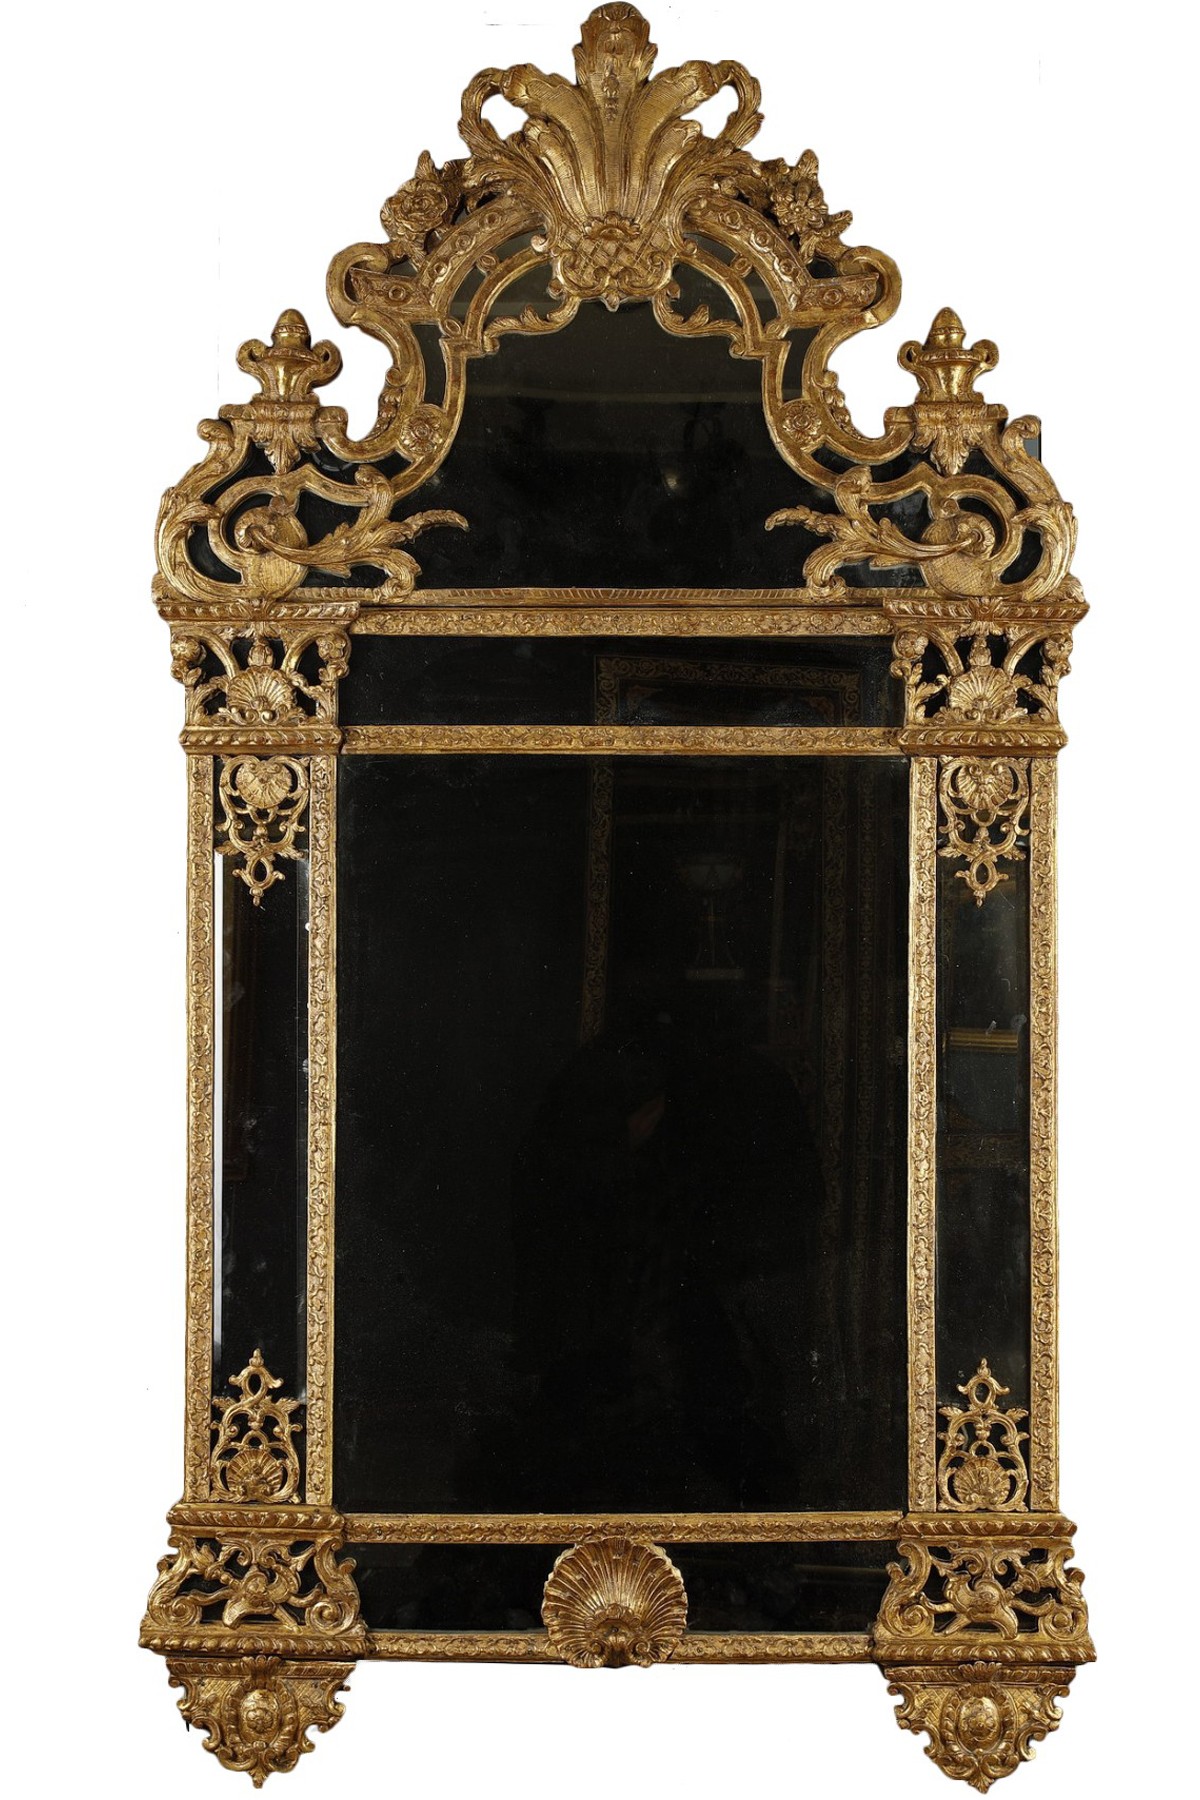 Great miror French Régence period - Ref.96864